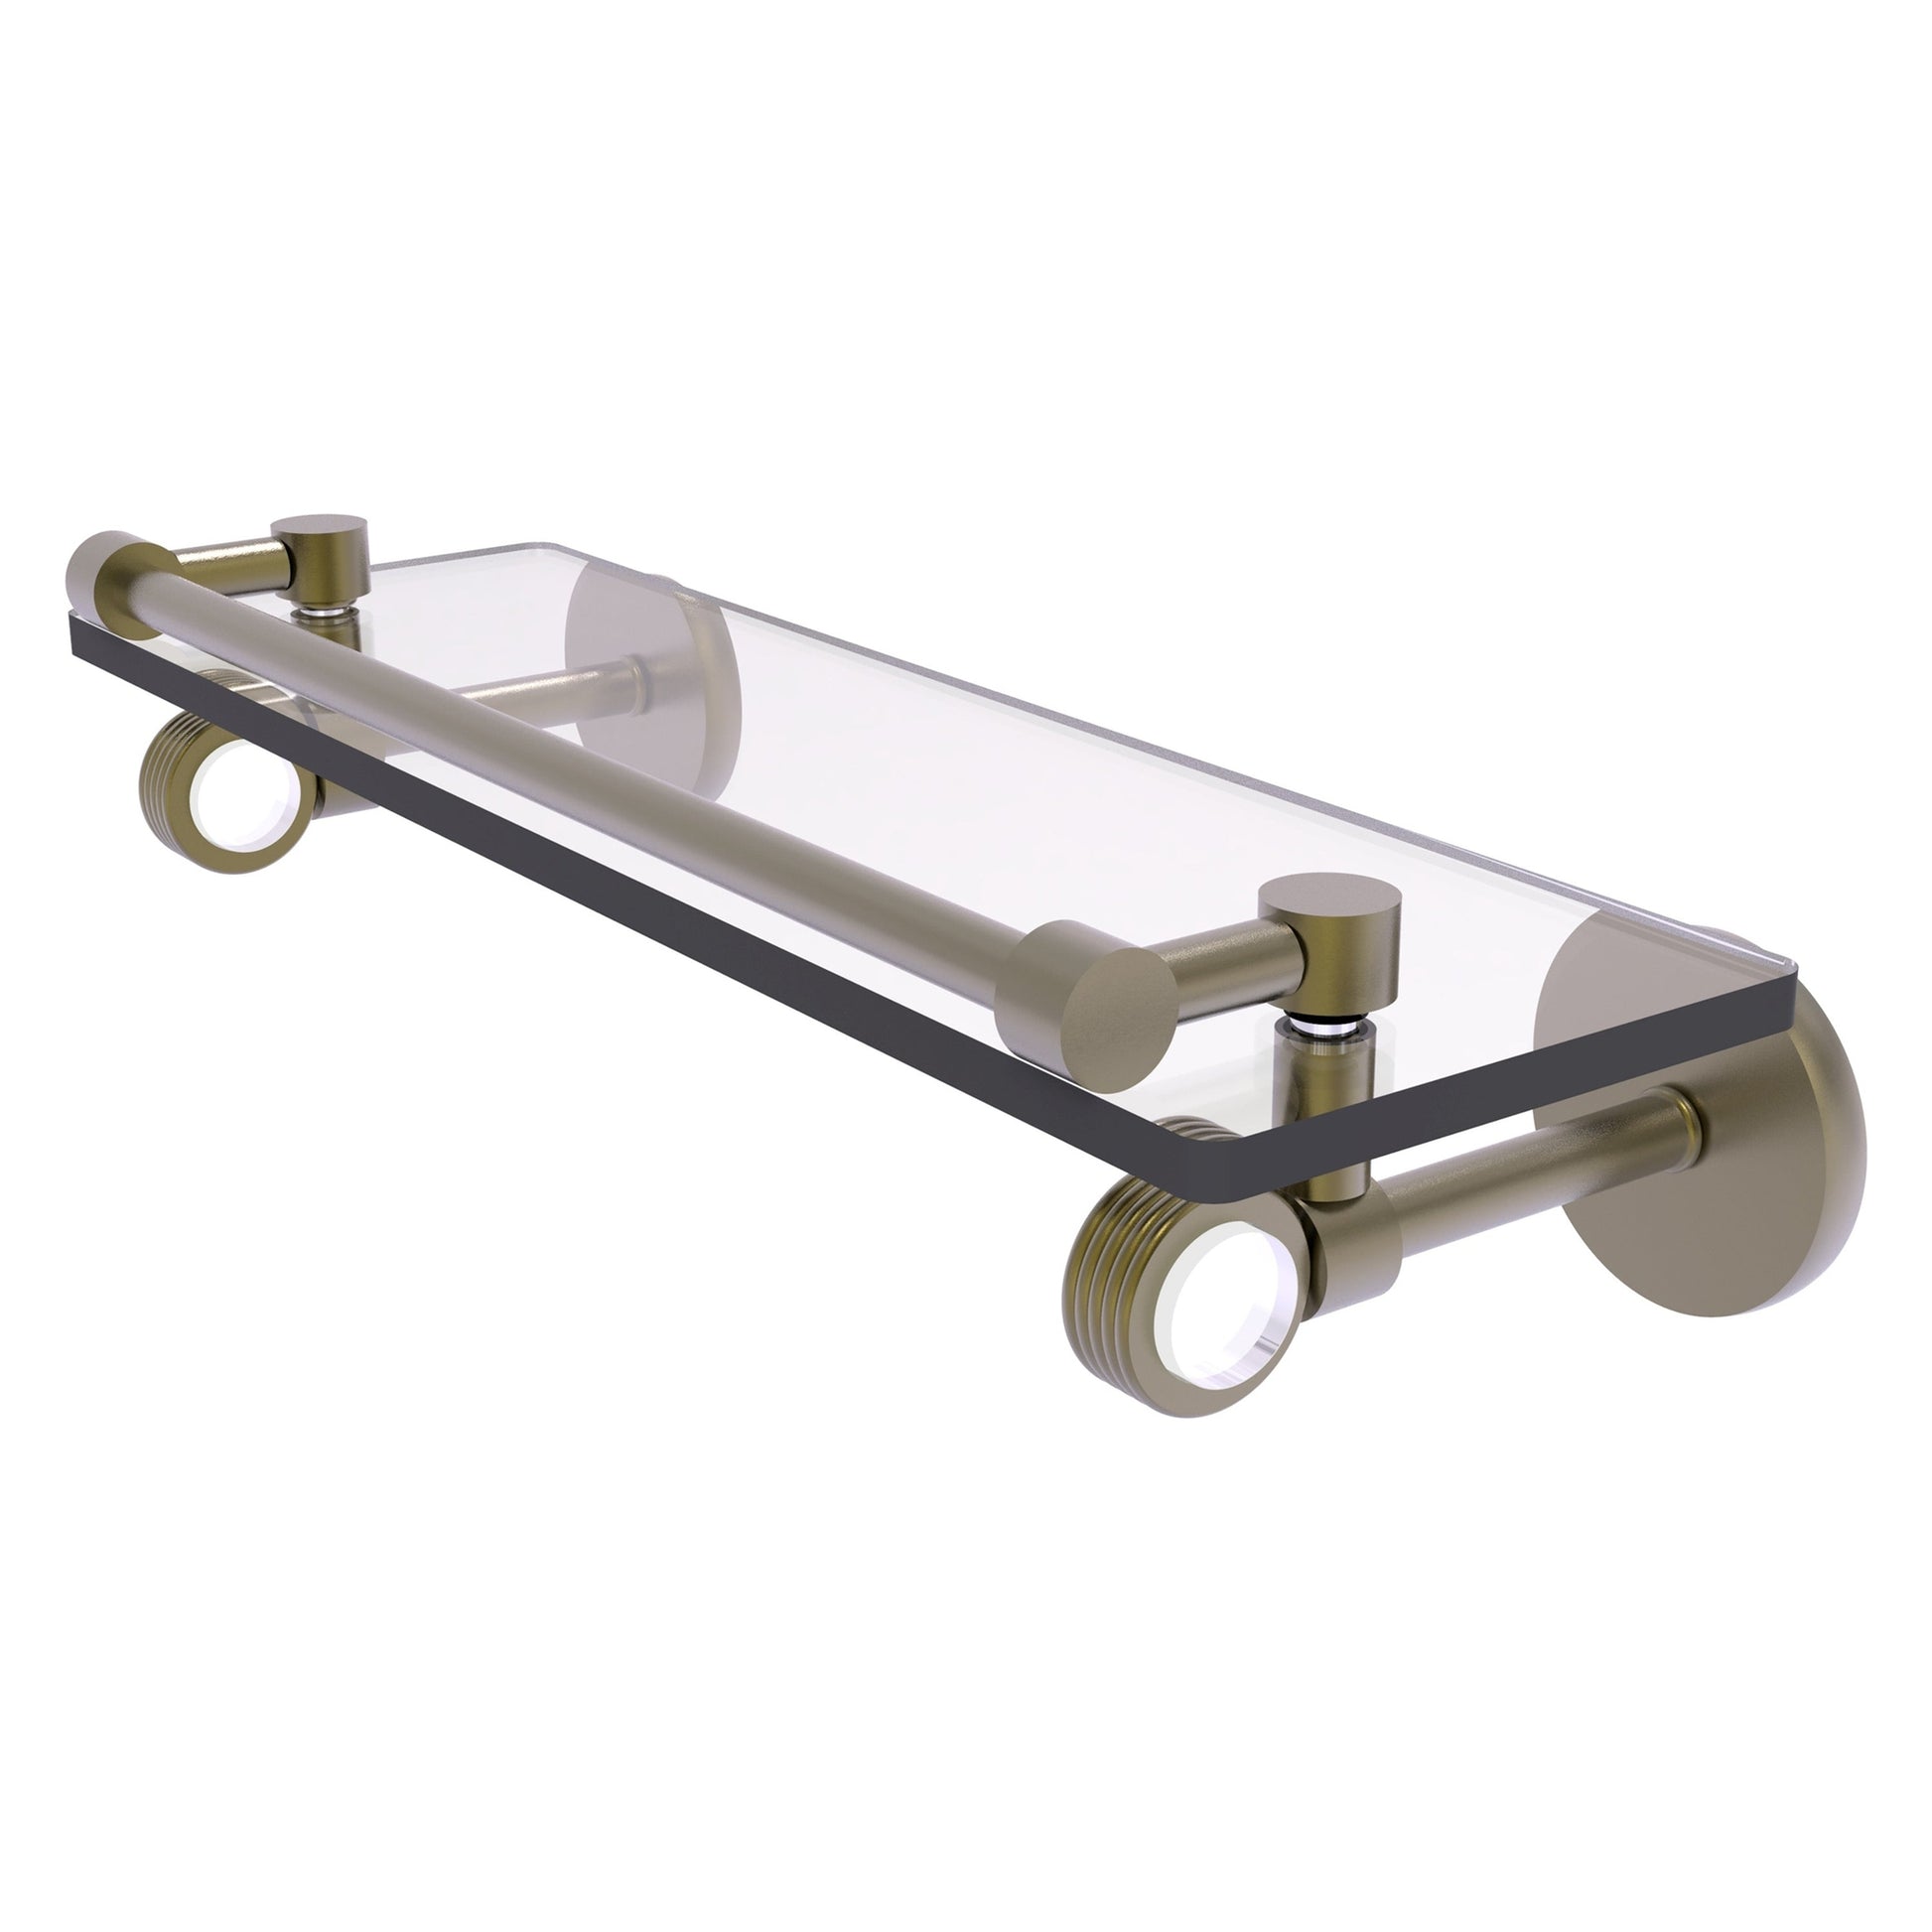 https://usbathstore.com/cdn/shop/files/Allied-Brass-Clearview-16-x-5_65-Antique-Brass-Solid-Brass-Gallery-Rail-Glass-Shelf-With-Grooved-Accents.jpg?v=1694396736&width=1946